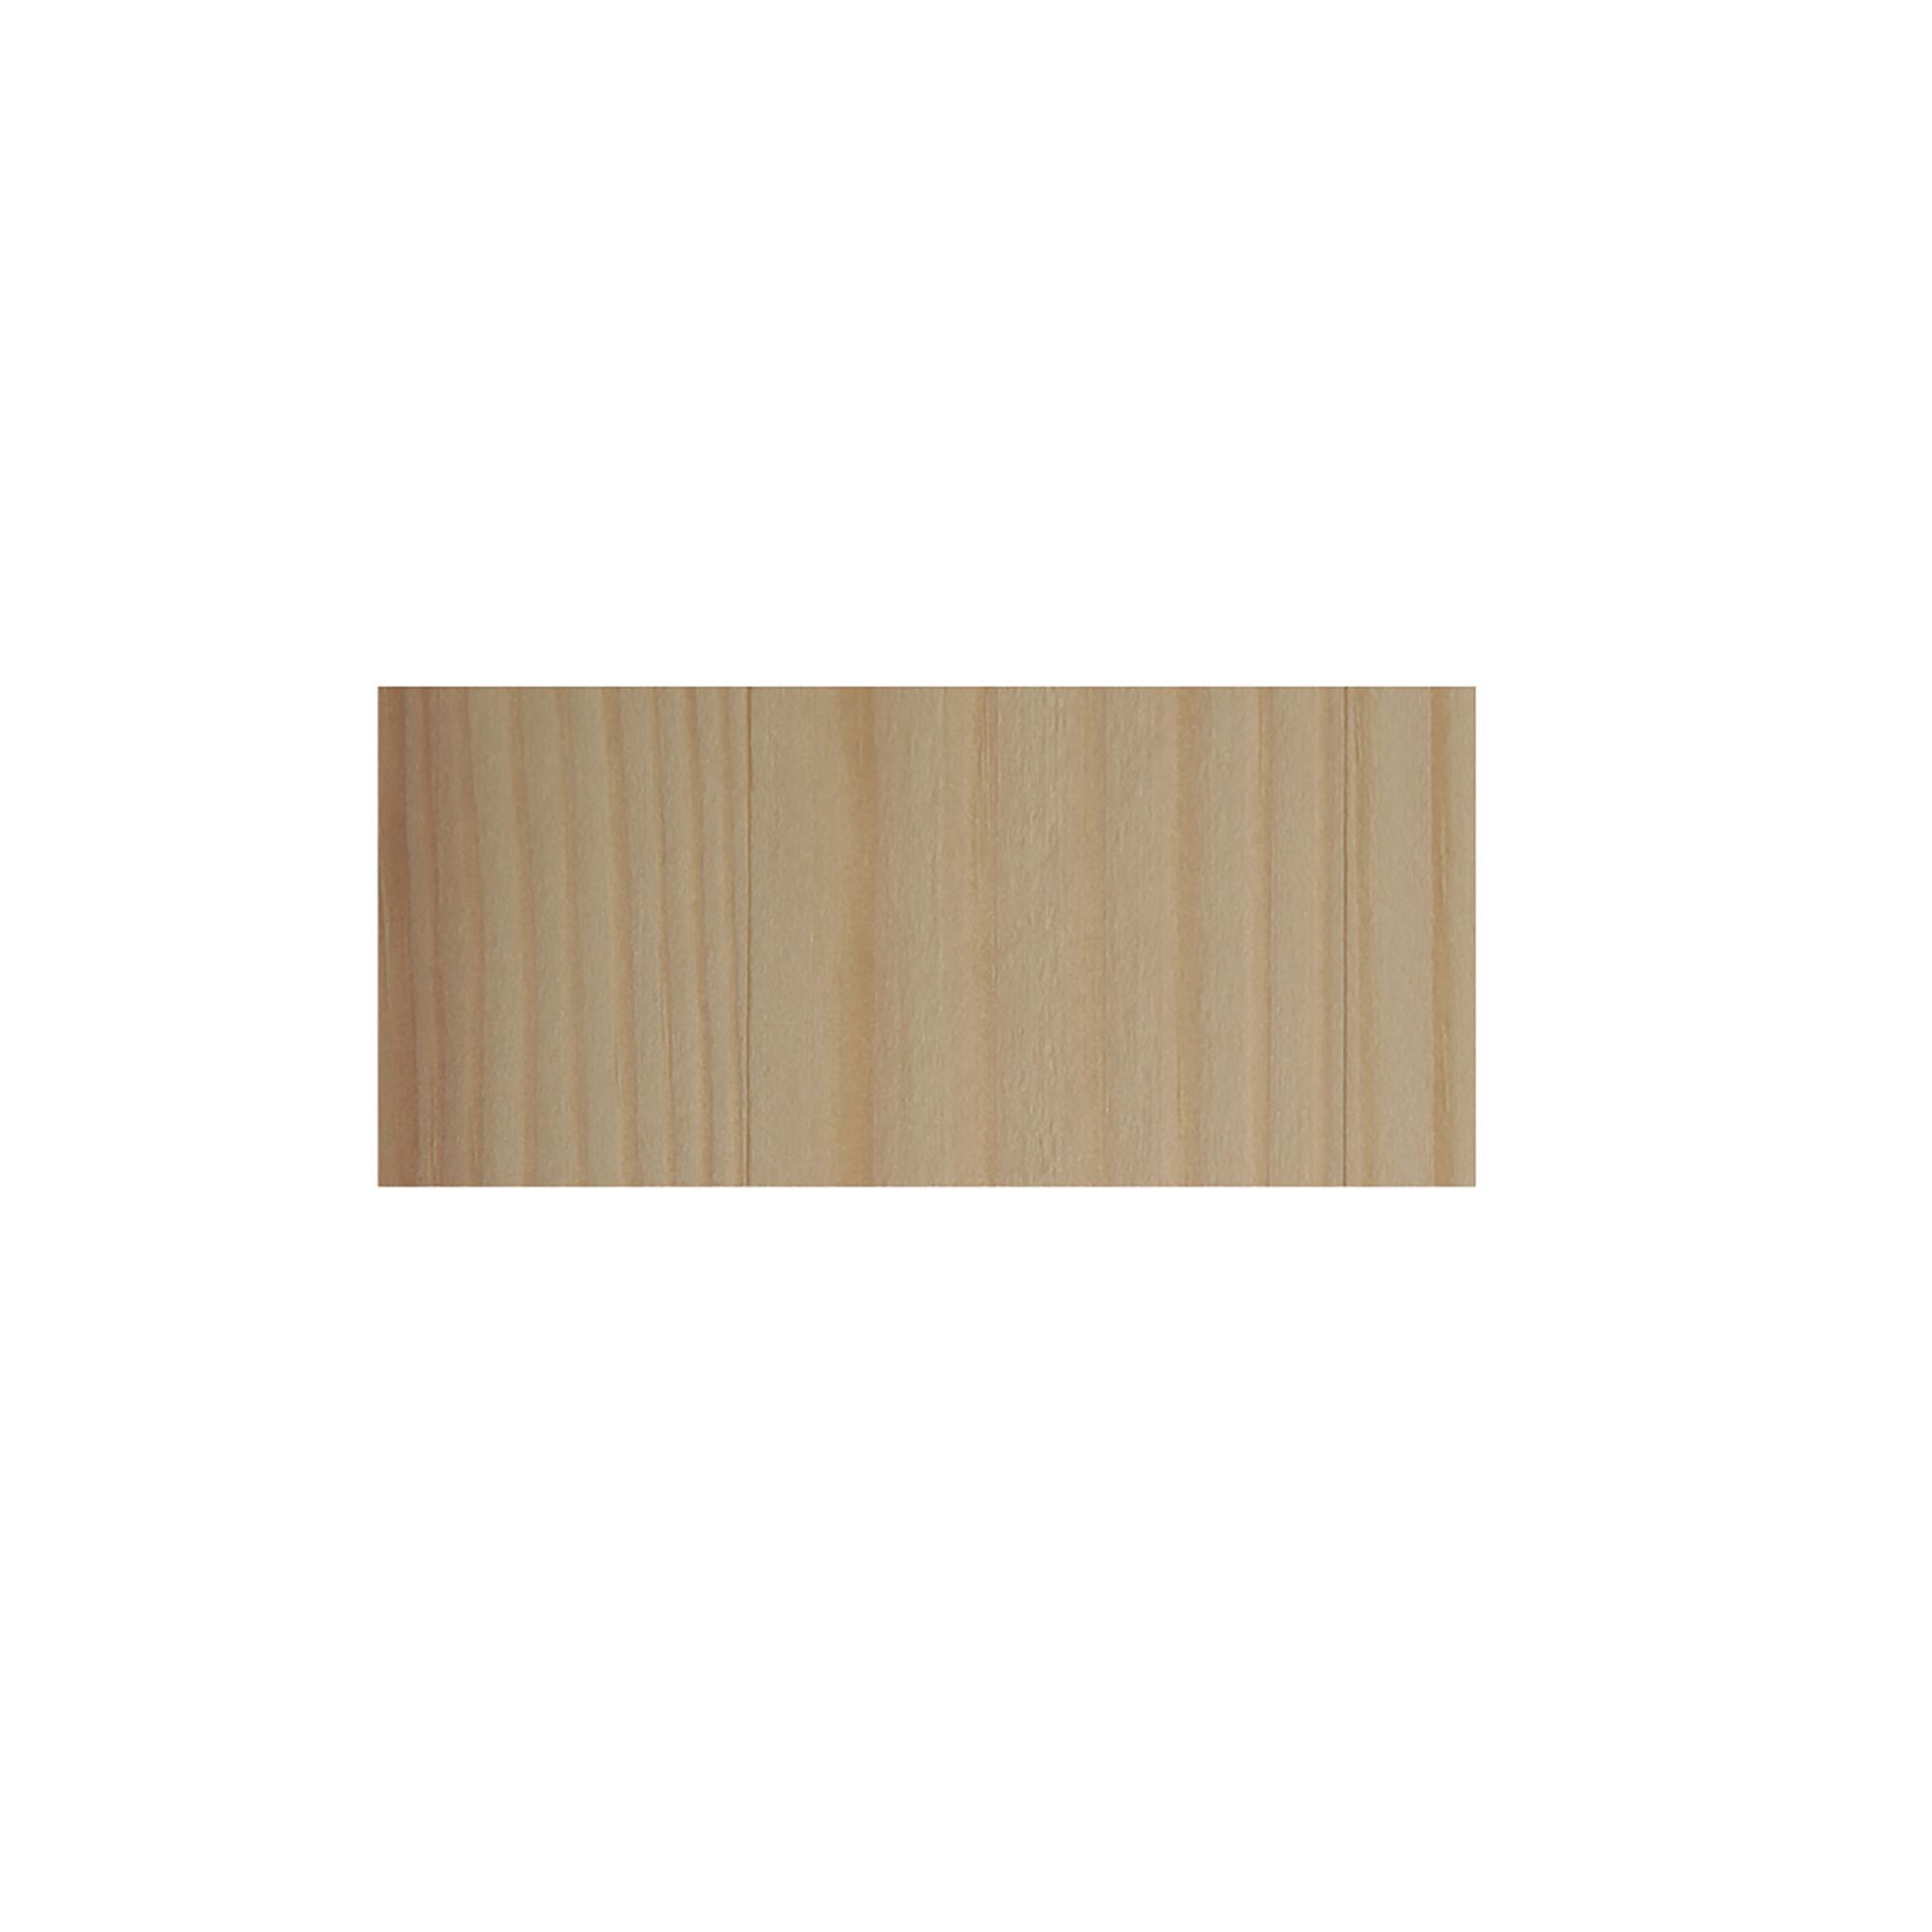 Cheshire Mouldings Smooth Planed Square edge Pine Stripwood (L)0.9m (W)25mm (T)10.5mm STPN44